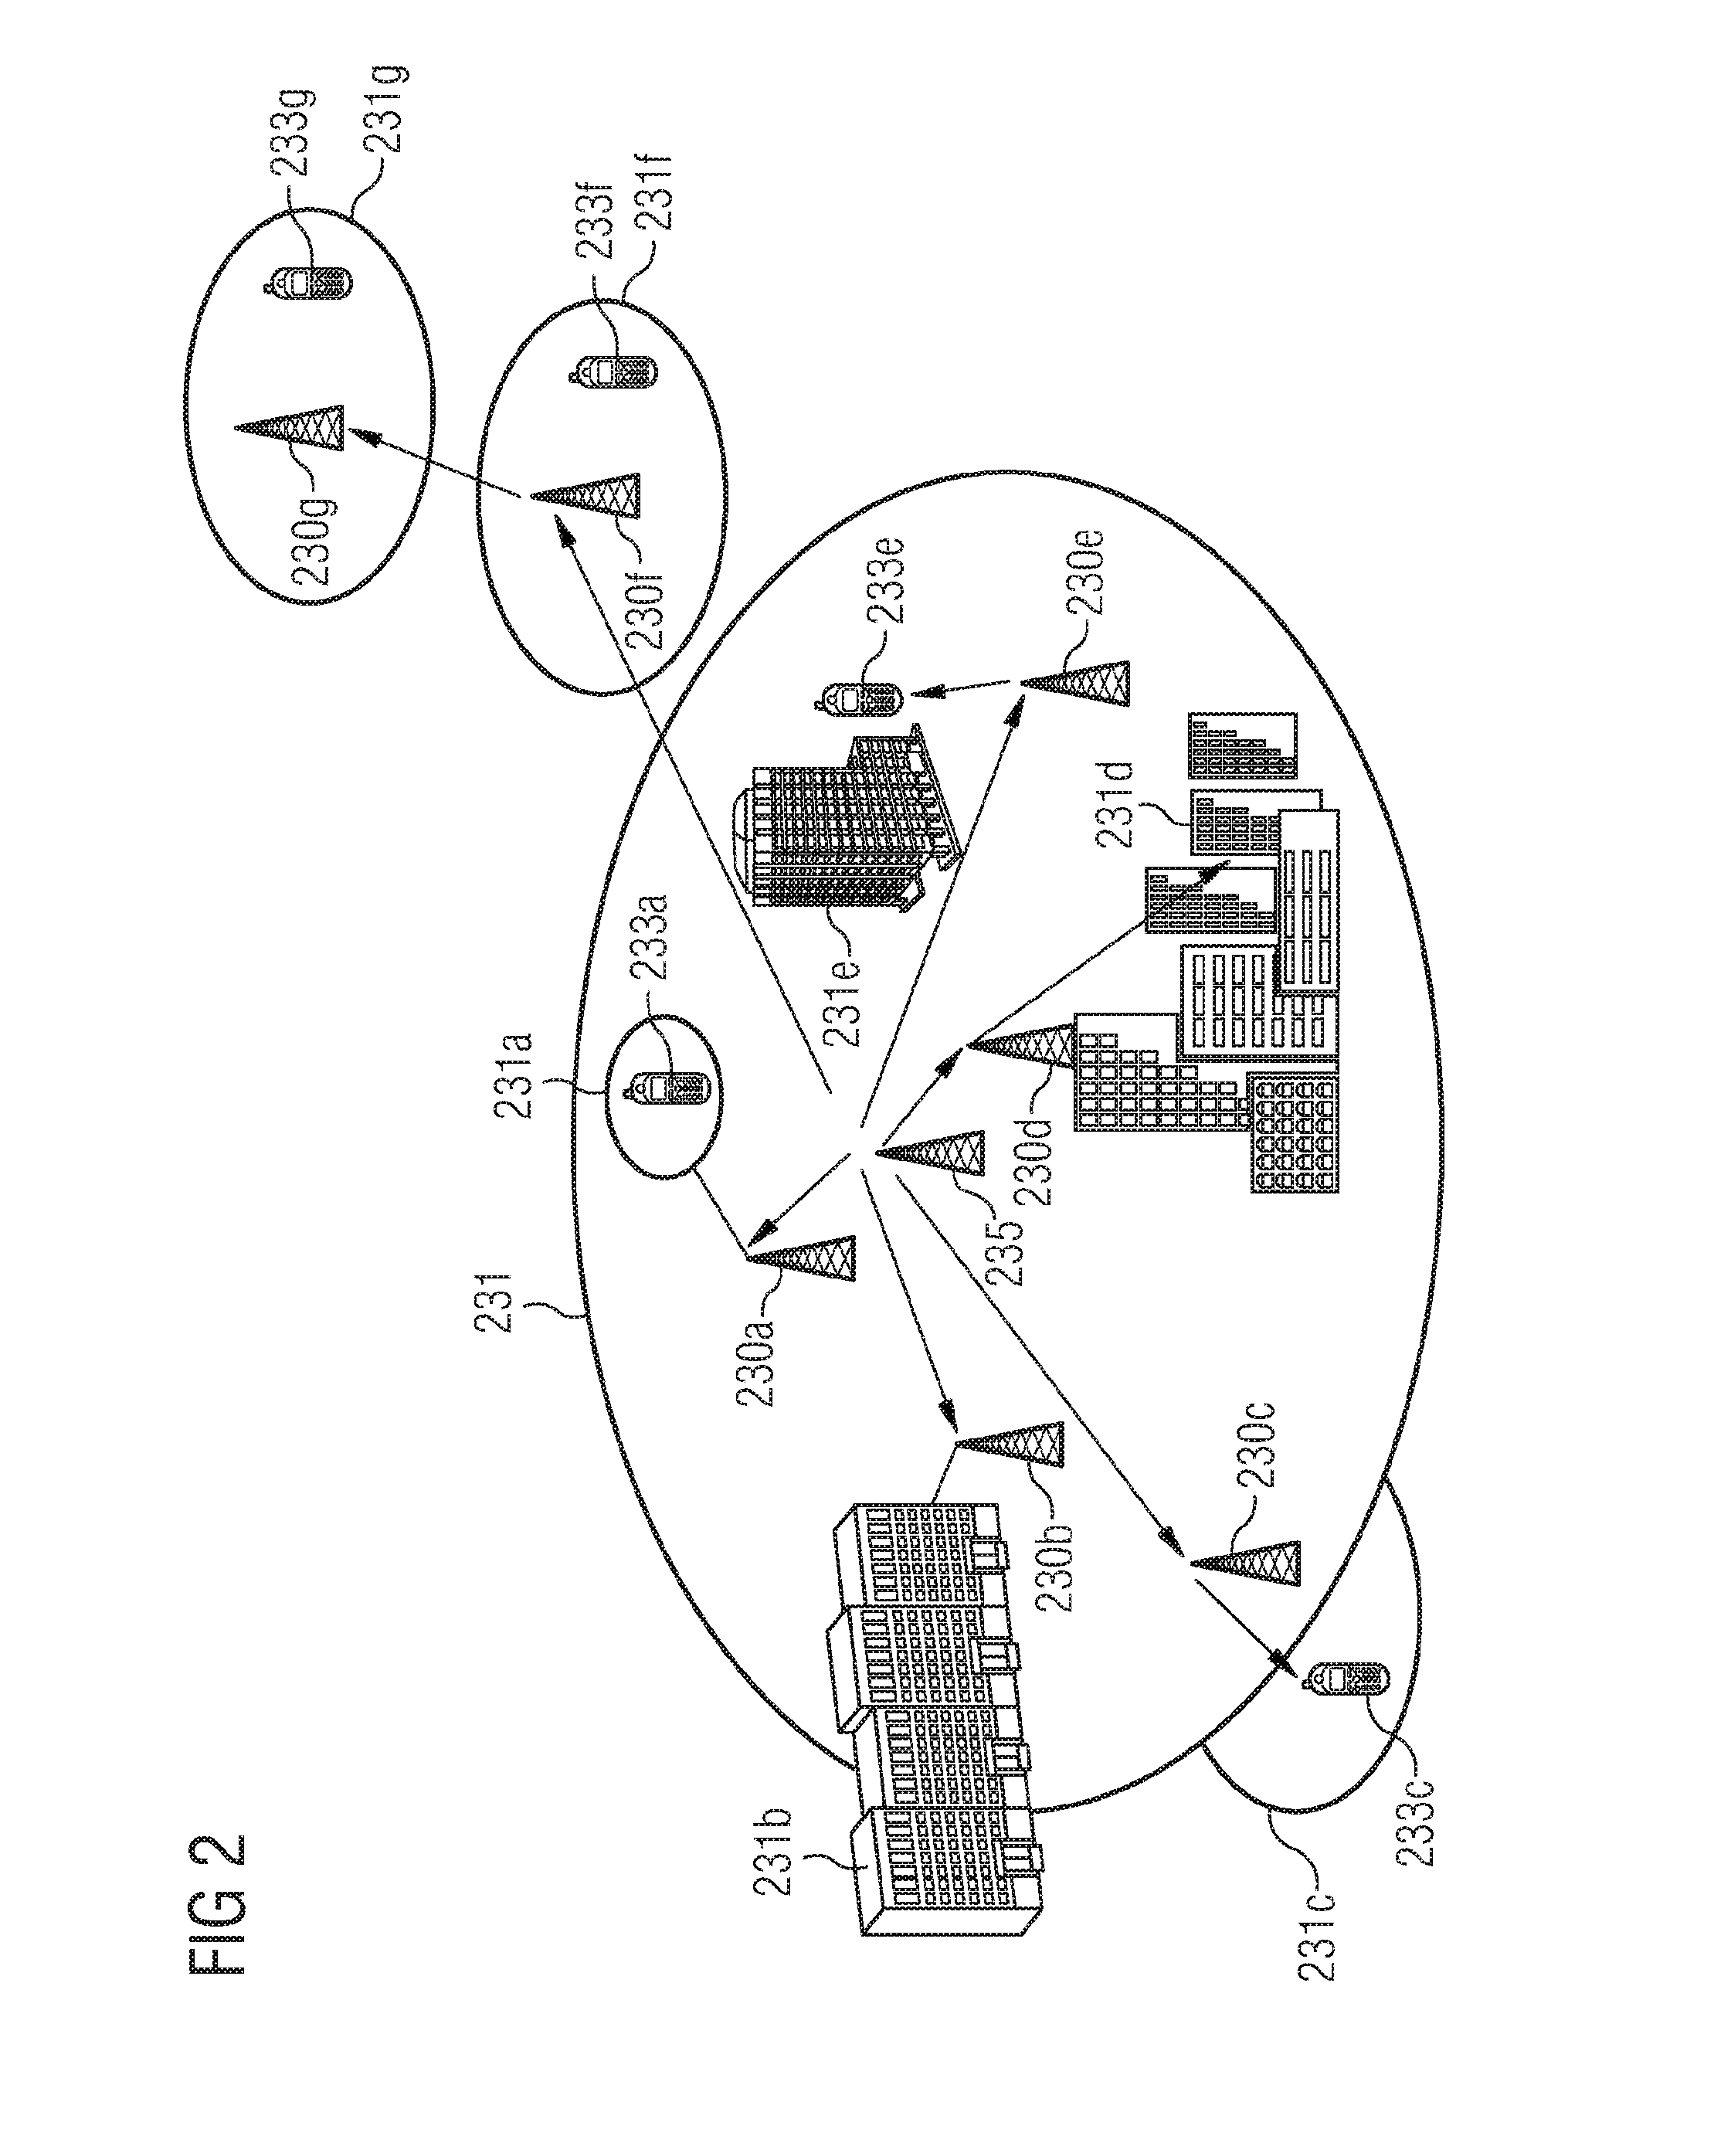 Network Comprising a Privately Owned Base Station Coupled with a Publicly Available Network Element